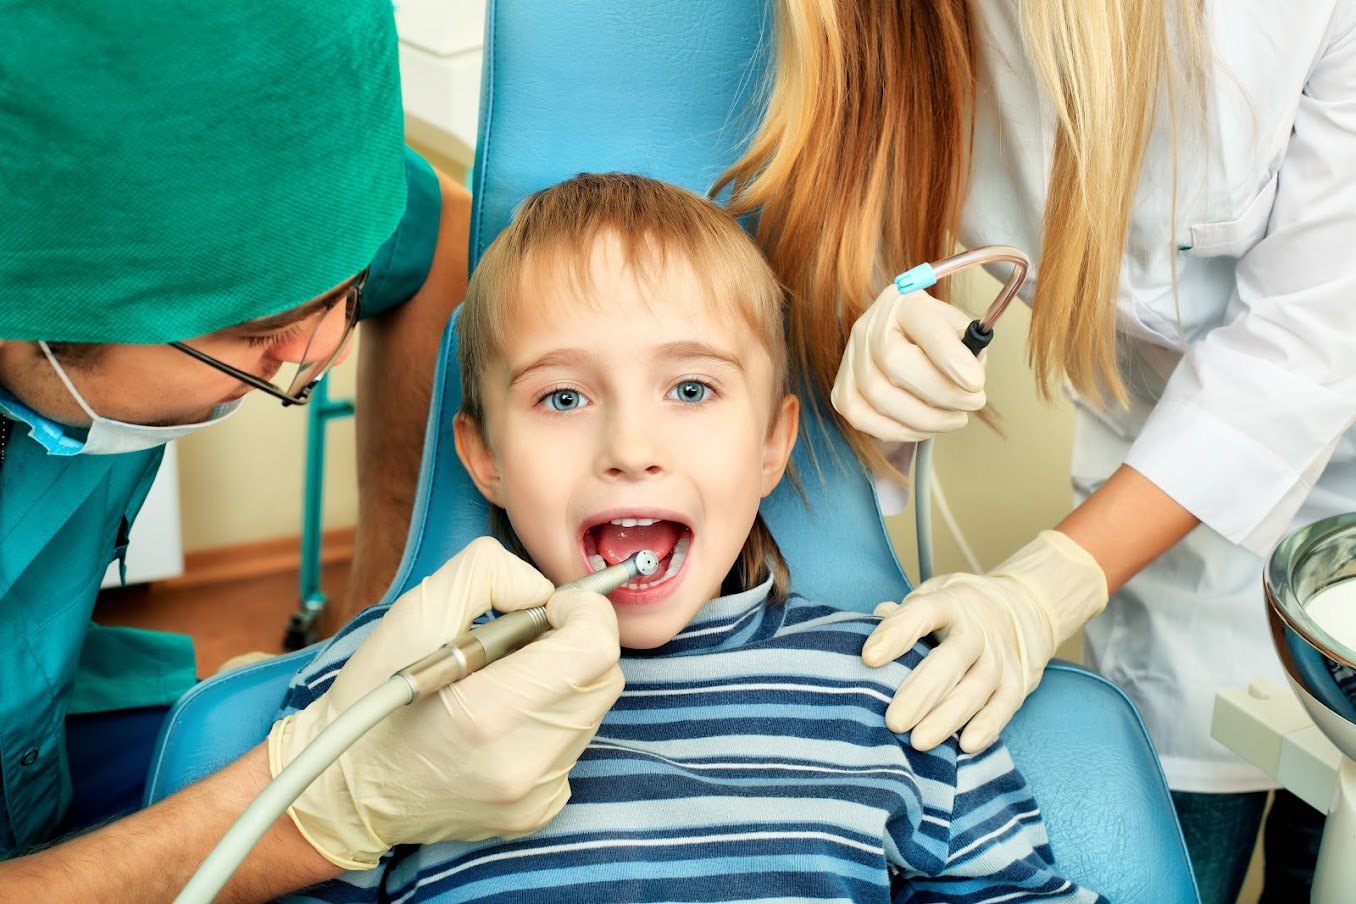 This is the image for the news article titled Why Children Need Regular Dental Cleaning